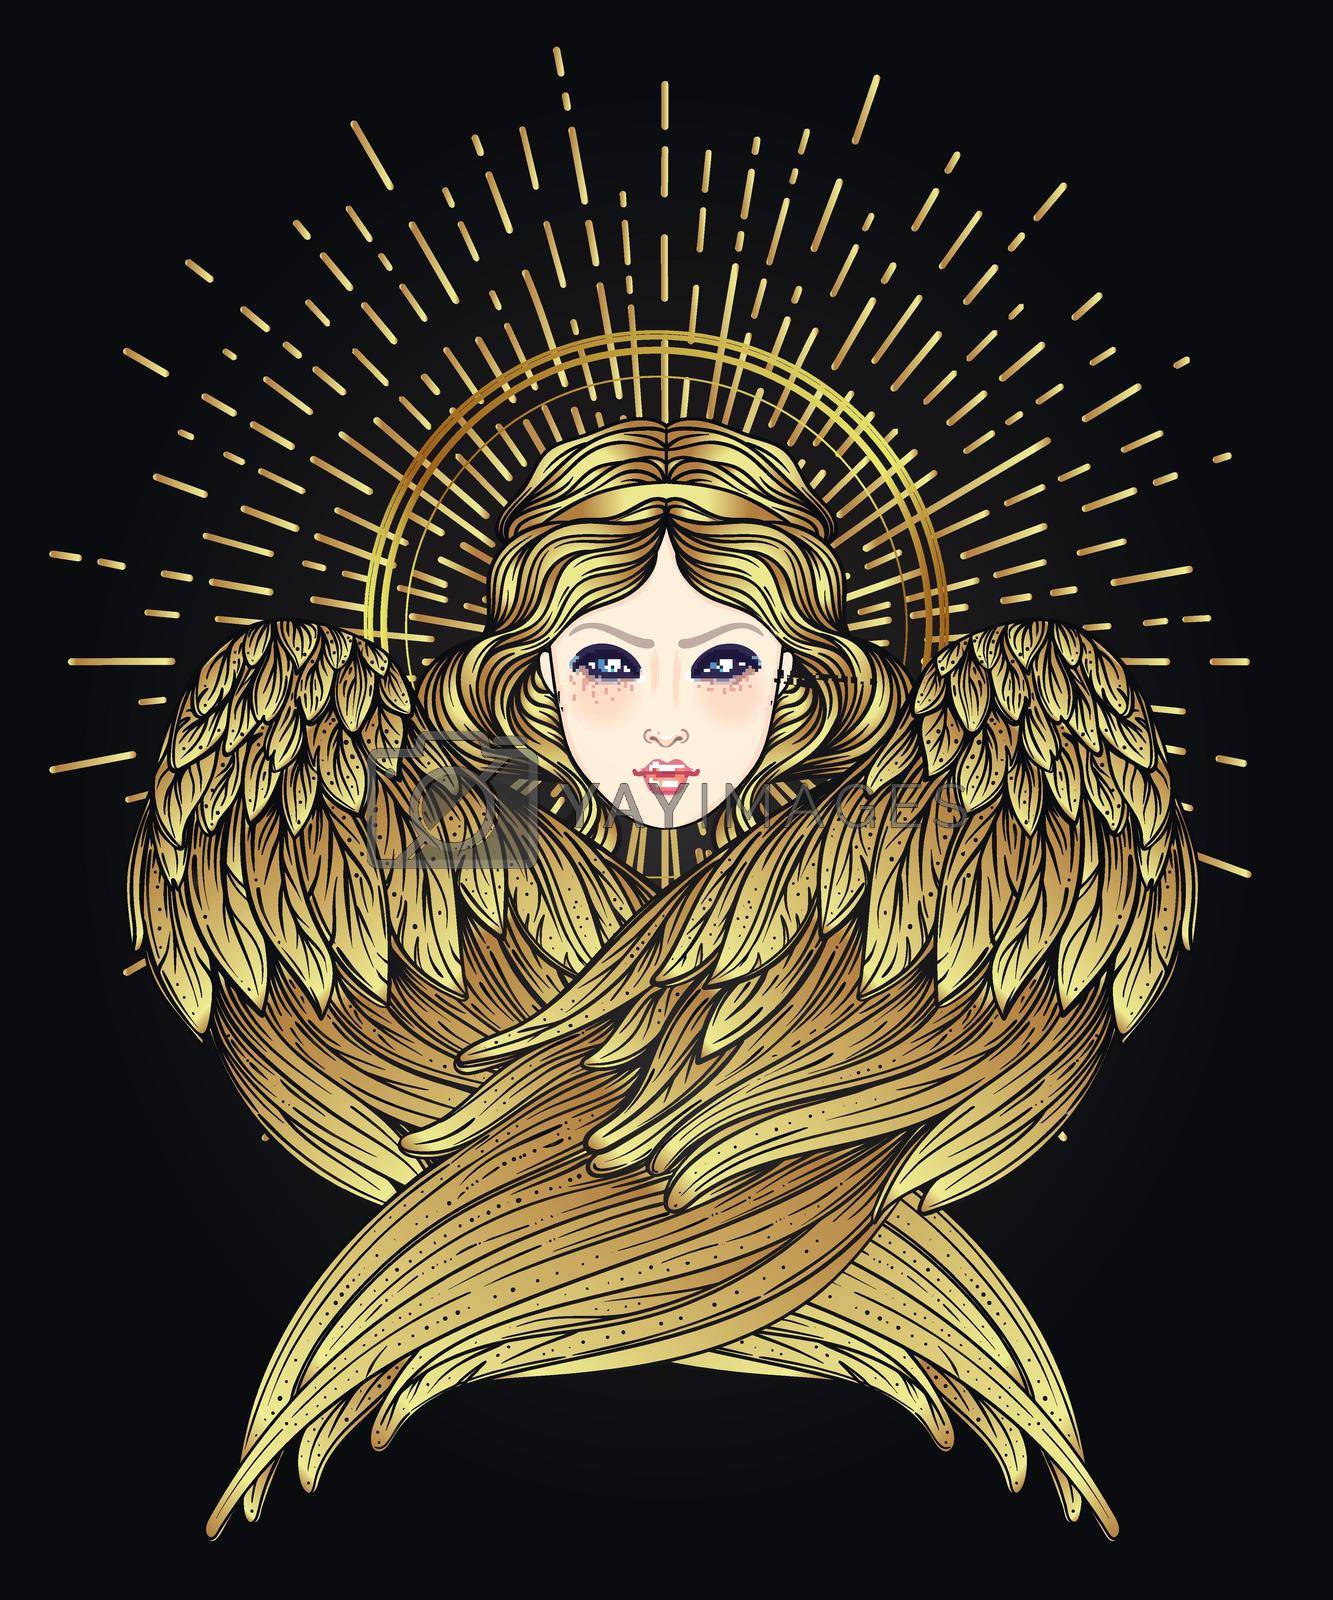 Royalty free image of Sirin, Alkonost, Gamayun mythological creature of Russian legends. Angel girl with wings. Isolated hand drawn vector illustration. Spirituality, occultism, alchemy, magic by varka